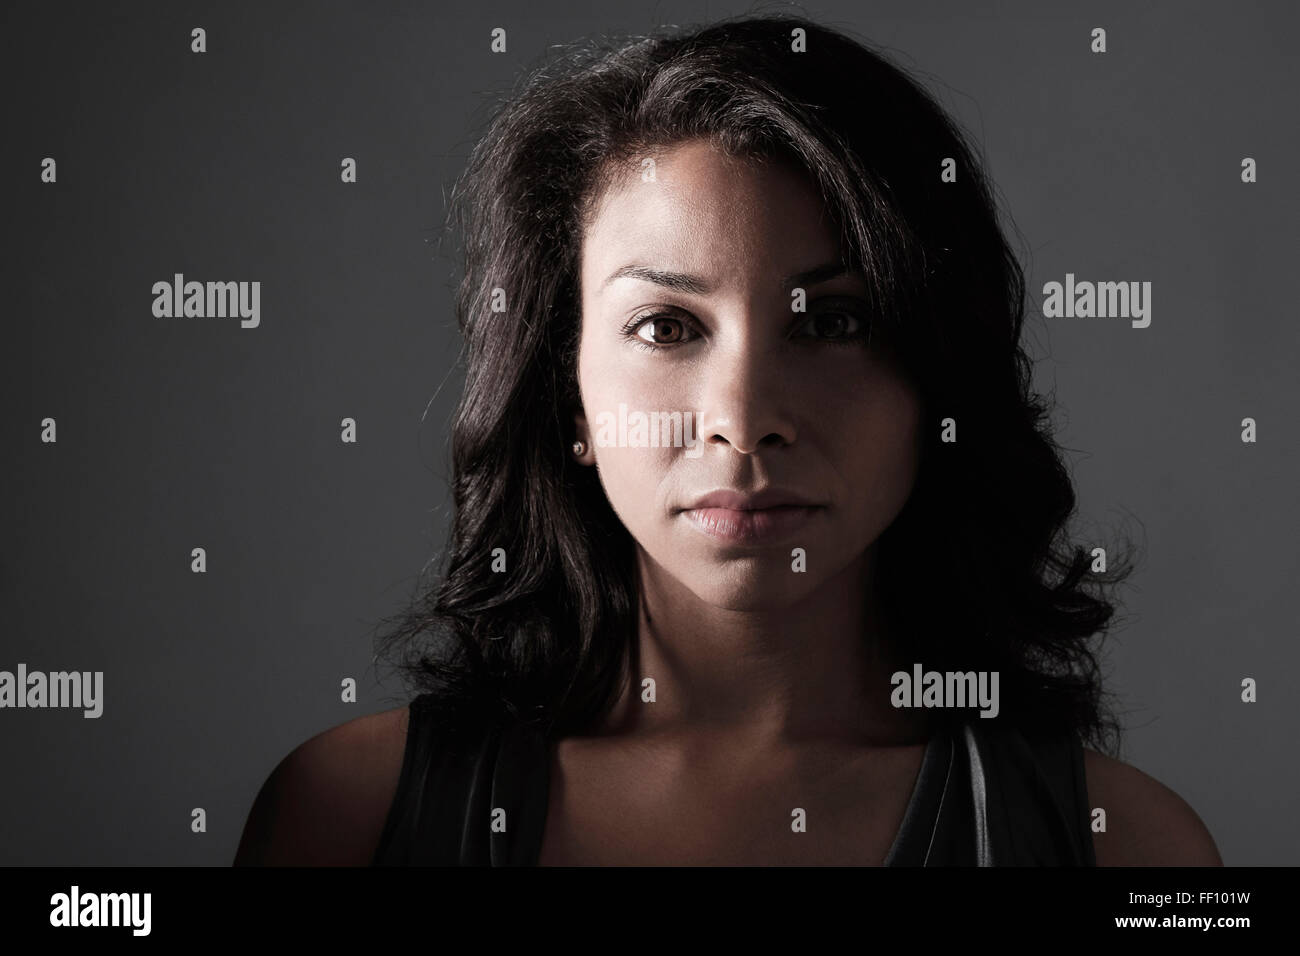 Mixed Race woman with serious expression Banque D'Images